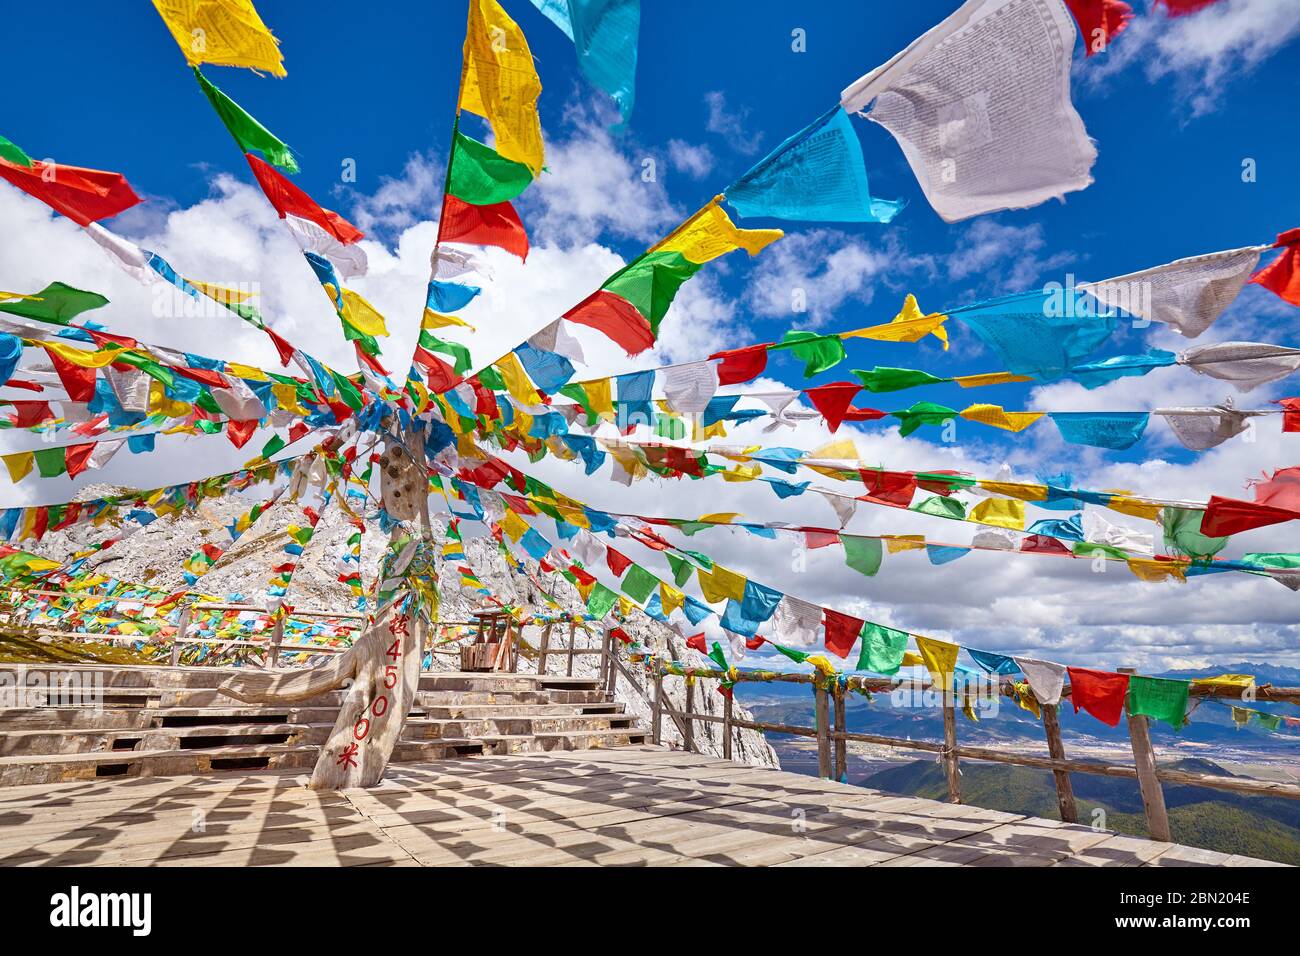 Top of the Shika Snow Mountain (4500 meters above the sea level) with Buddhist prayer flags, China. Stock Photo